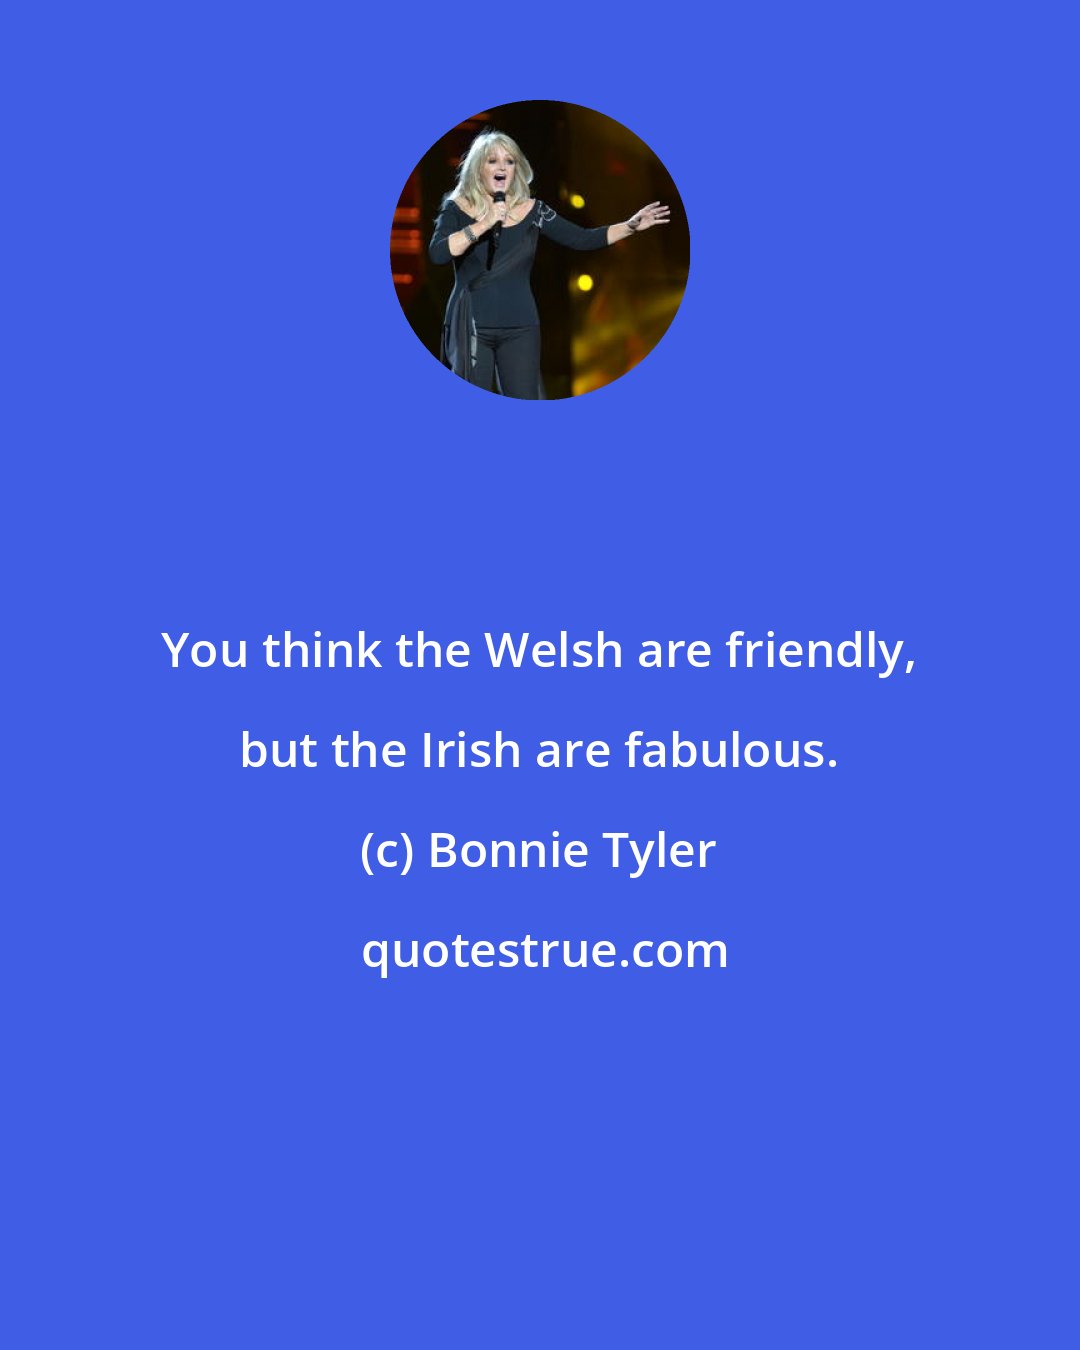 Bonnie Tyler: You think the Welsh are friendly, but the Irish are fabulous.